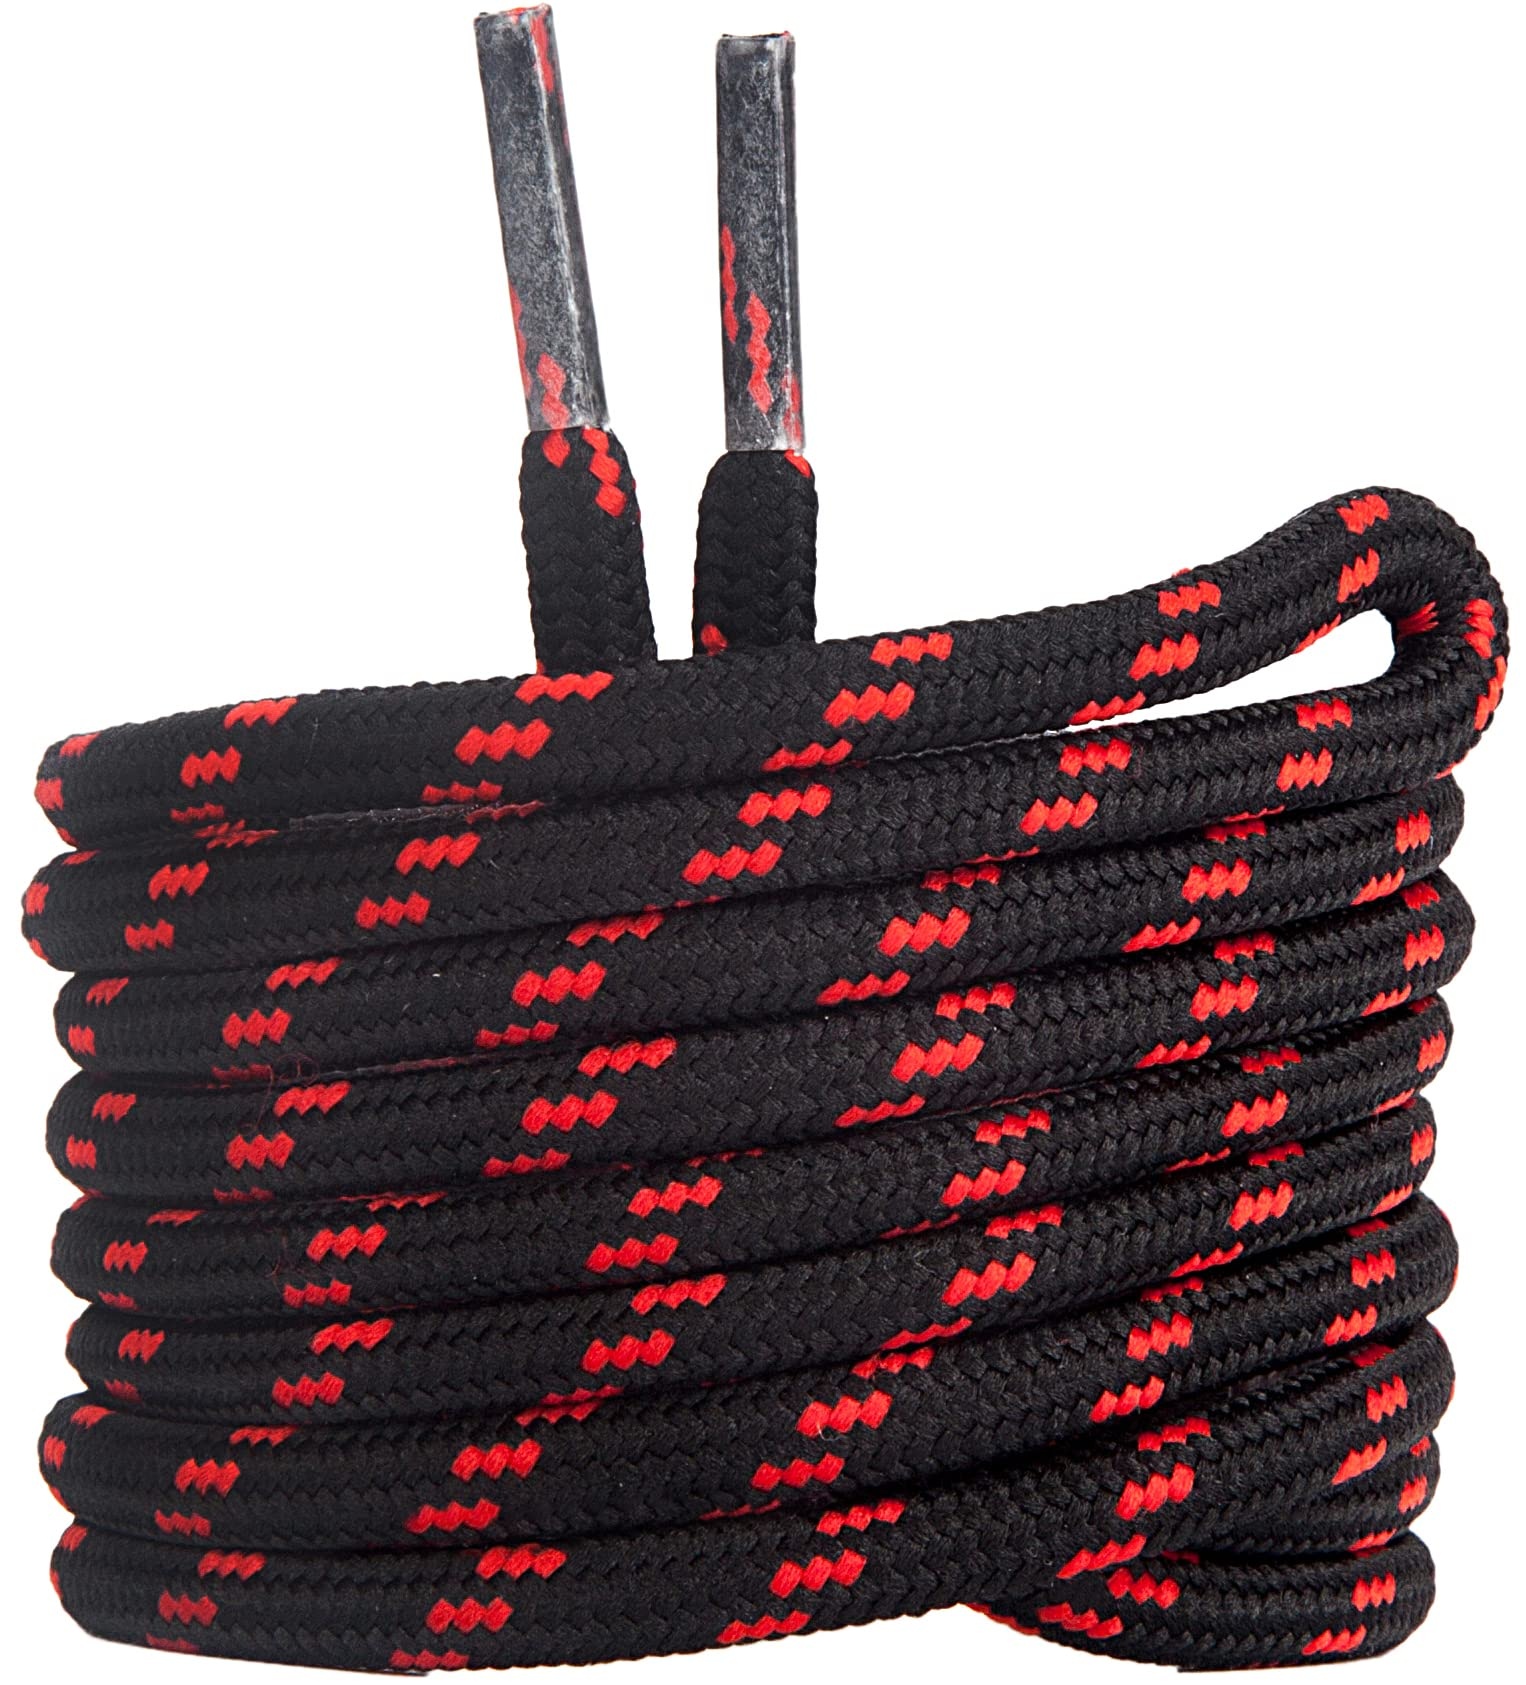 Tolumo Diameter 4.5 MM Round Durable Boot Laces Lengths 100 to 160 CM Shoelaces for Work and Leisure Boots, Hiking Shoes Black Red 100 CM 1 Pair - 100cm - 1 Pair